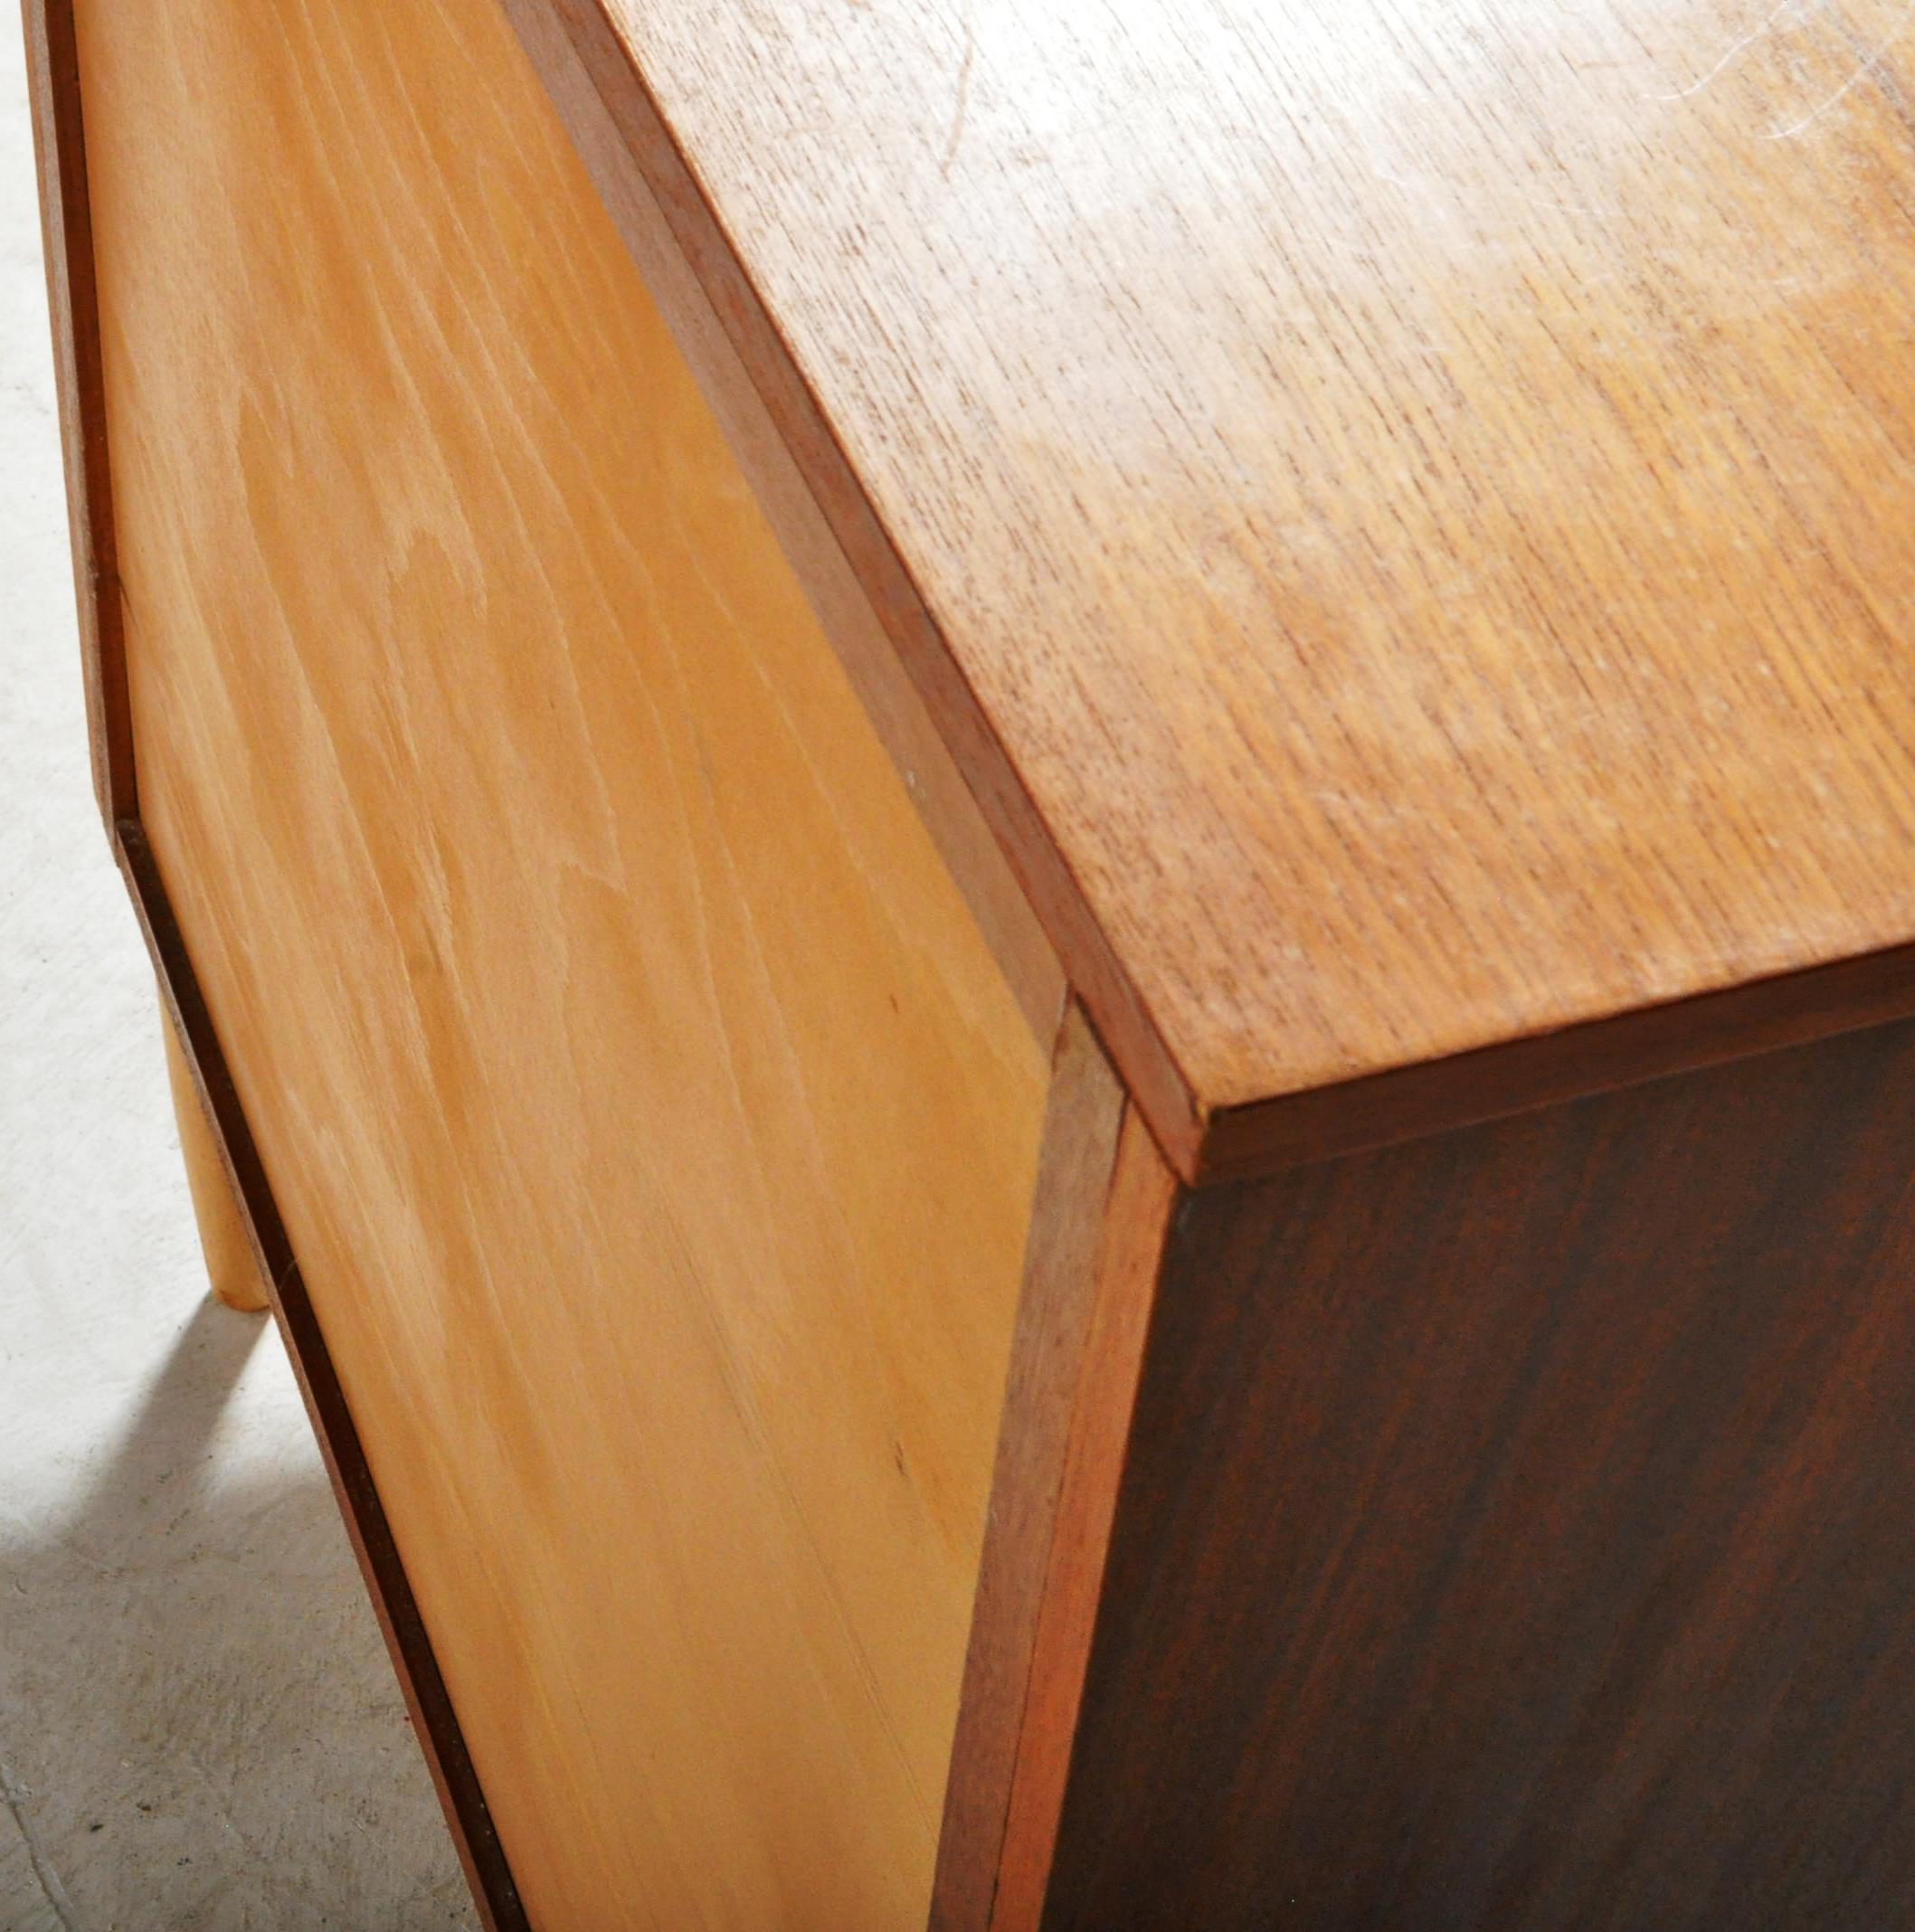 JENTIQUE - MID 20TH CENTURY TEAK CHEST OF DRAWERS - Image 8 of 8